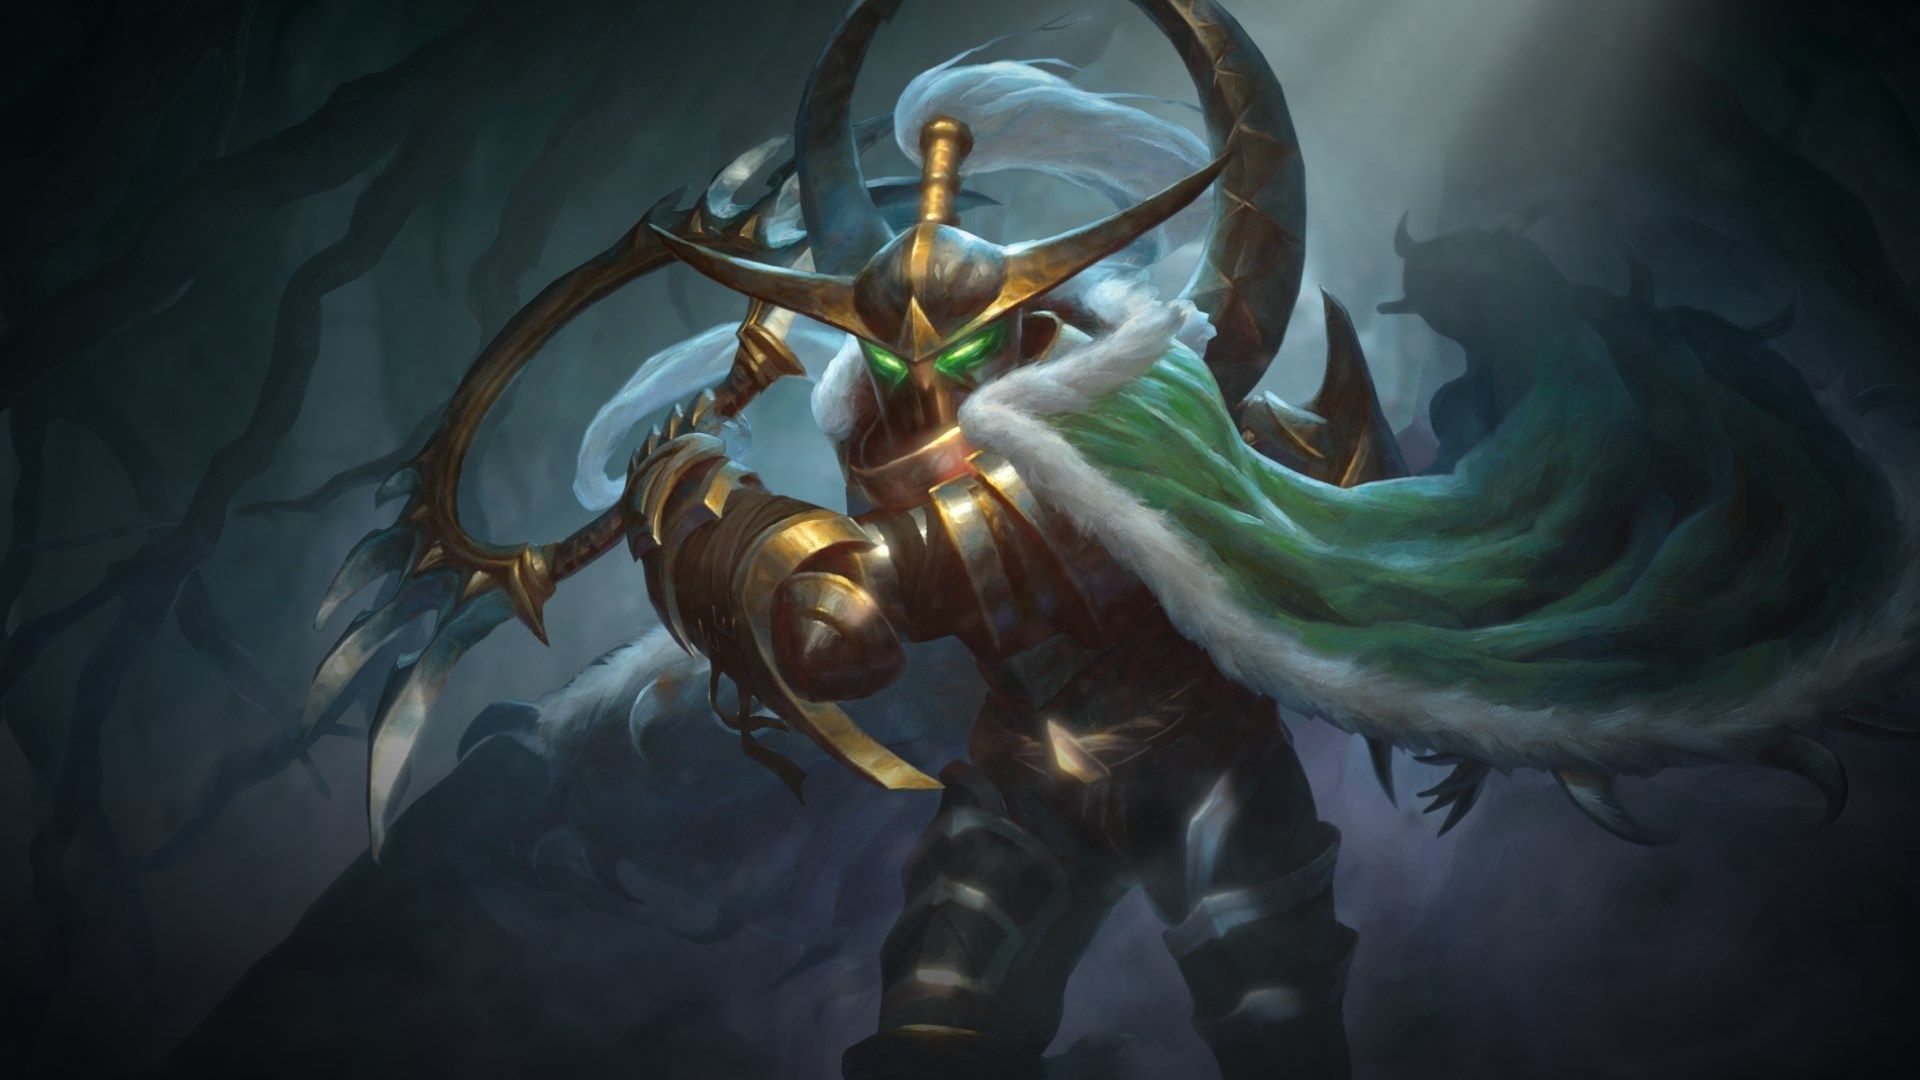 Maiev nerfed again in latest Heroes of the Storm patch notes